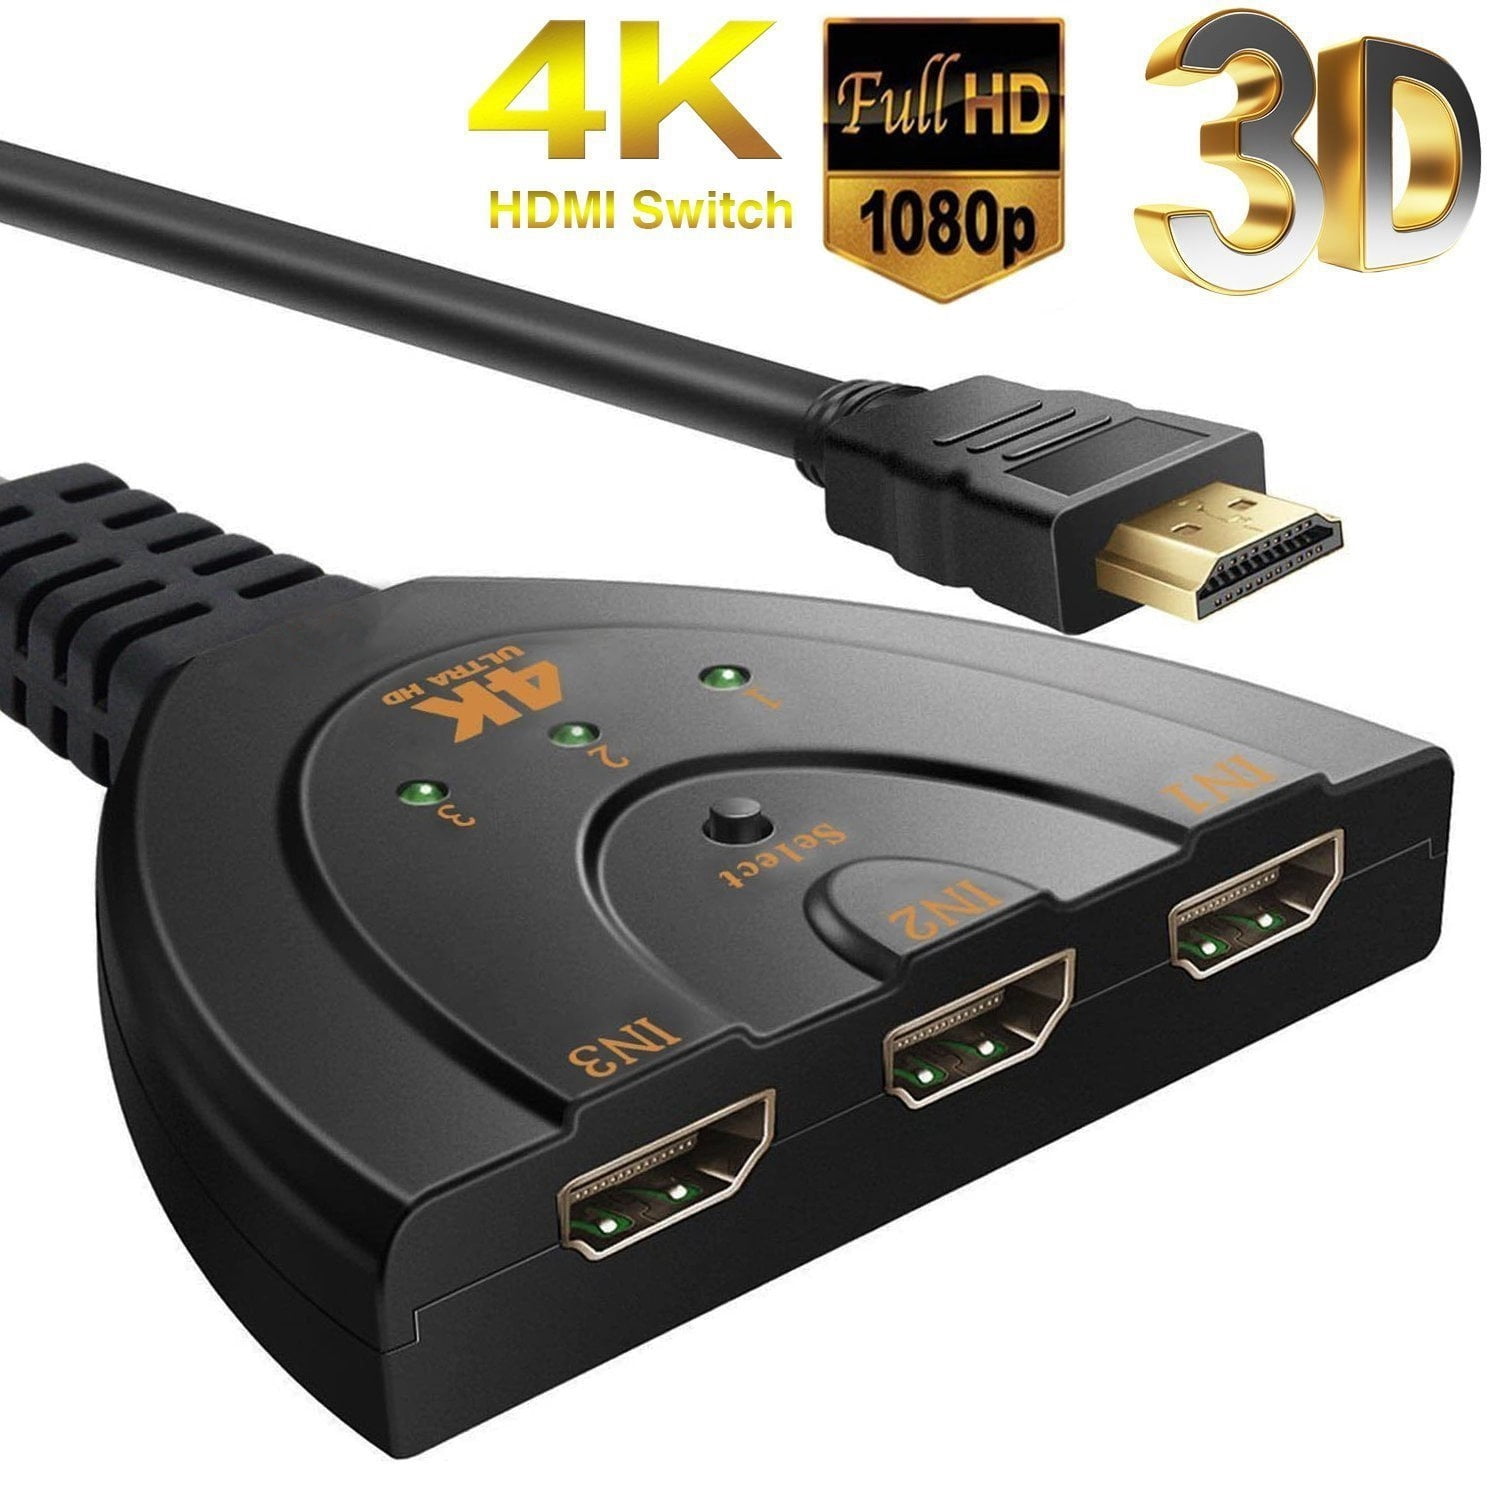 HDMI Switch 3 Port 4K HDMI Switcher 3x1 Switch HDMI Splitter Pigtail Cable Supports Full HD 4K 1080P 3D Player 